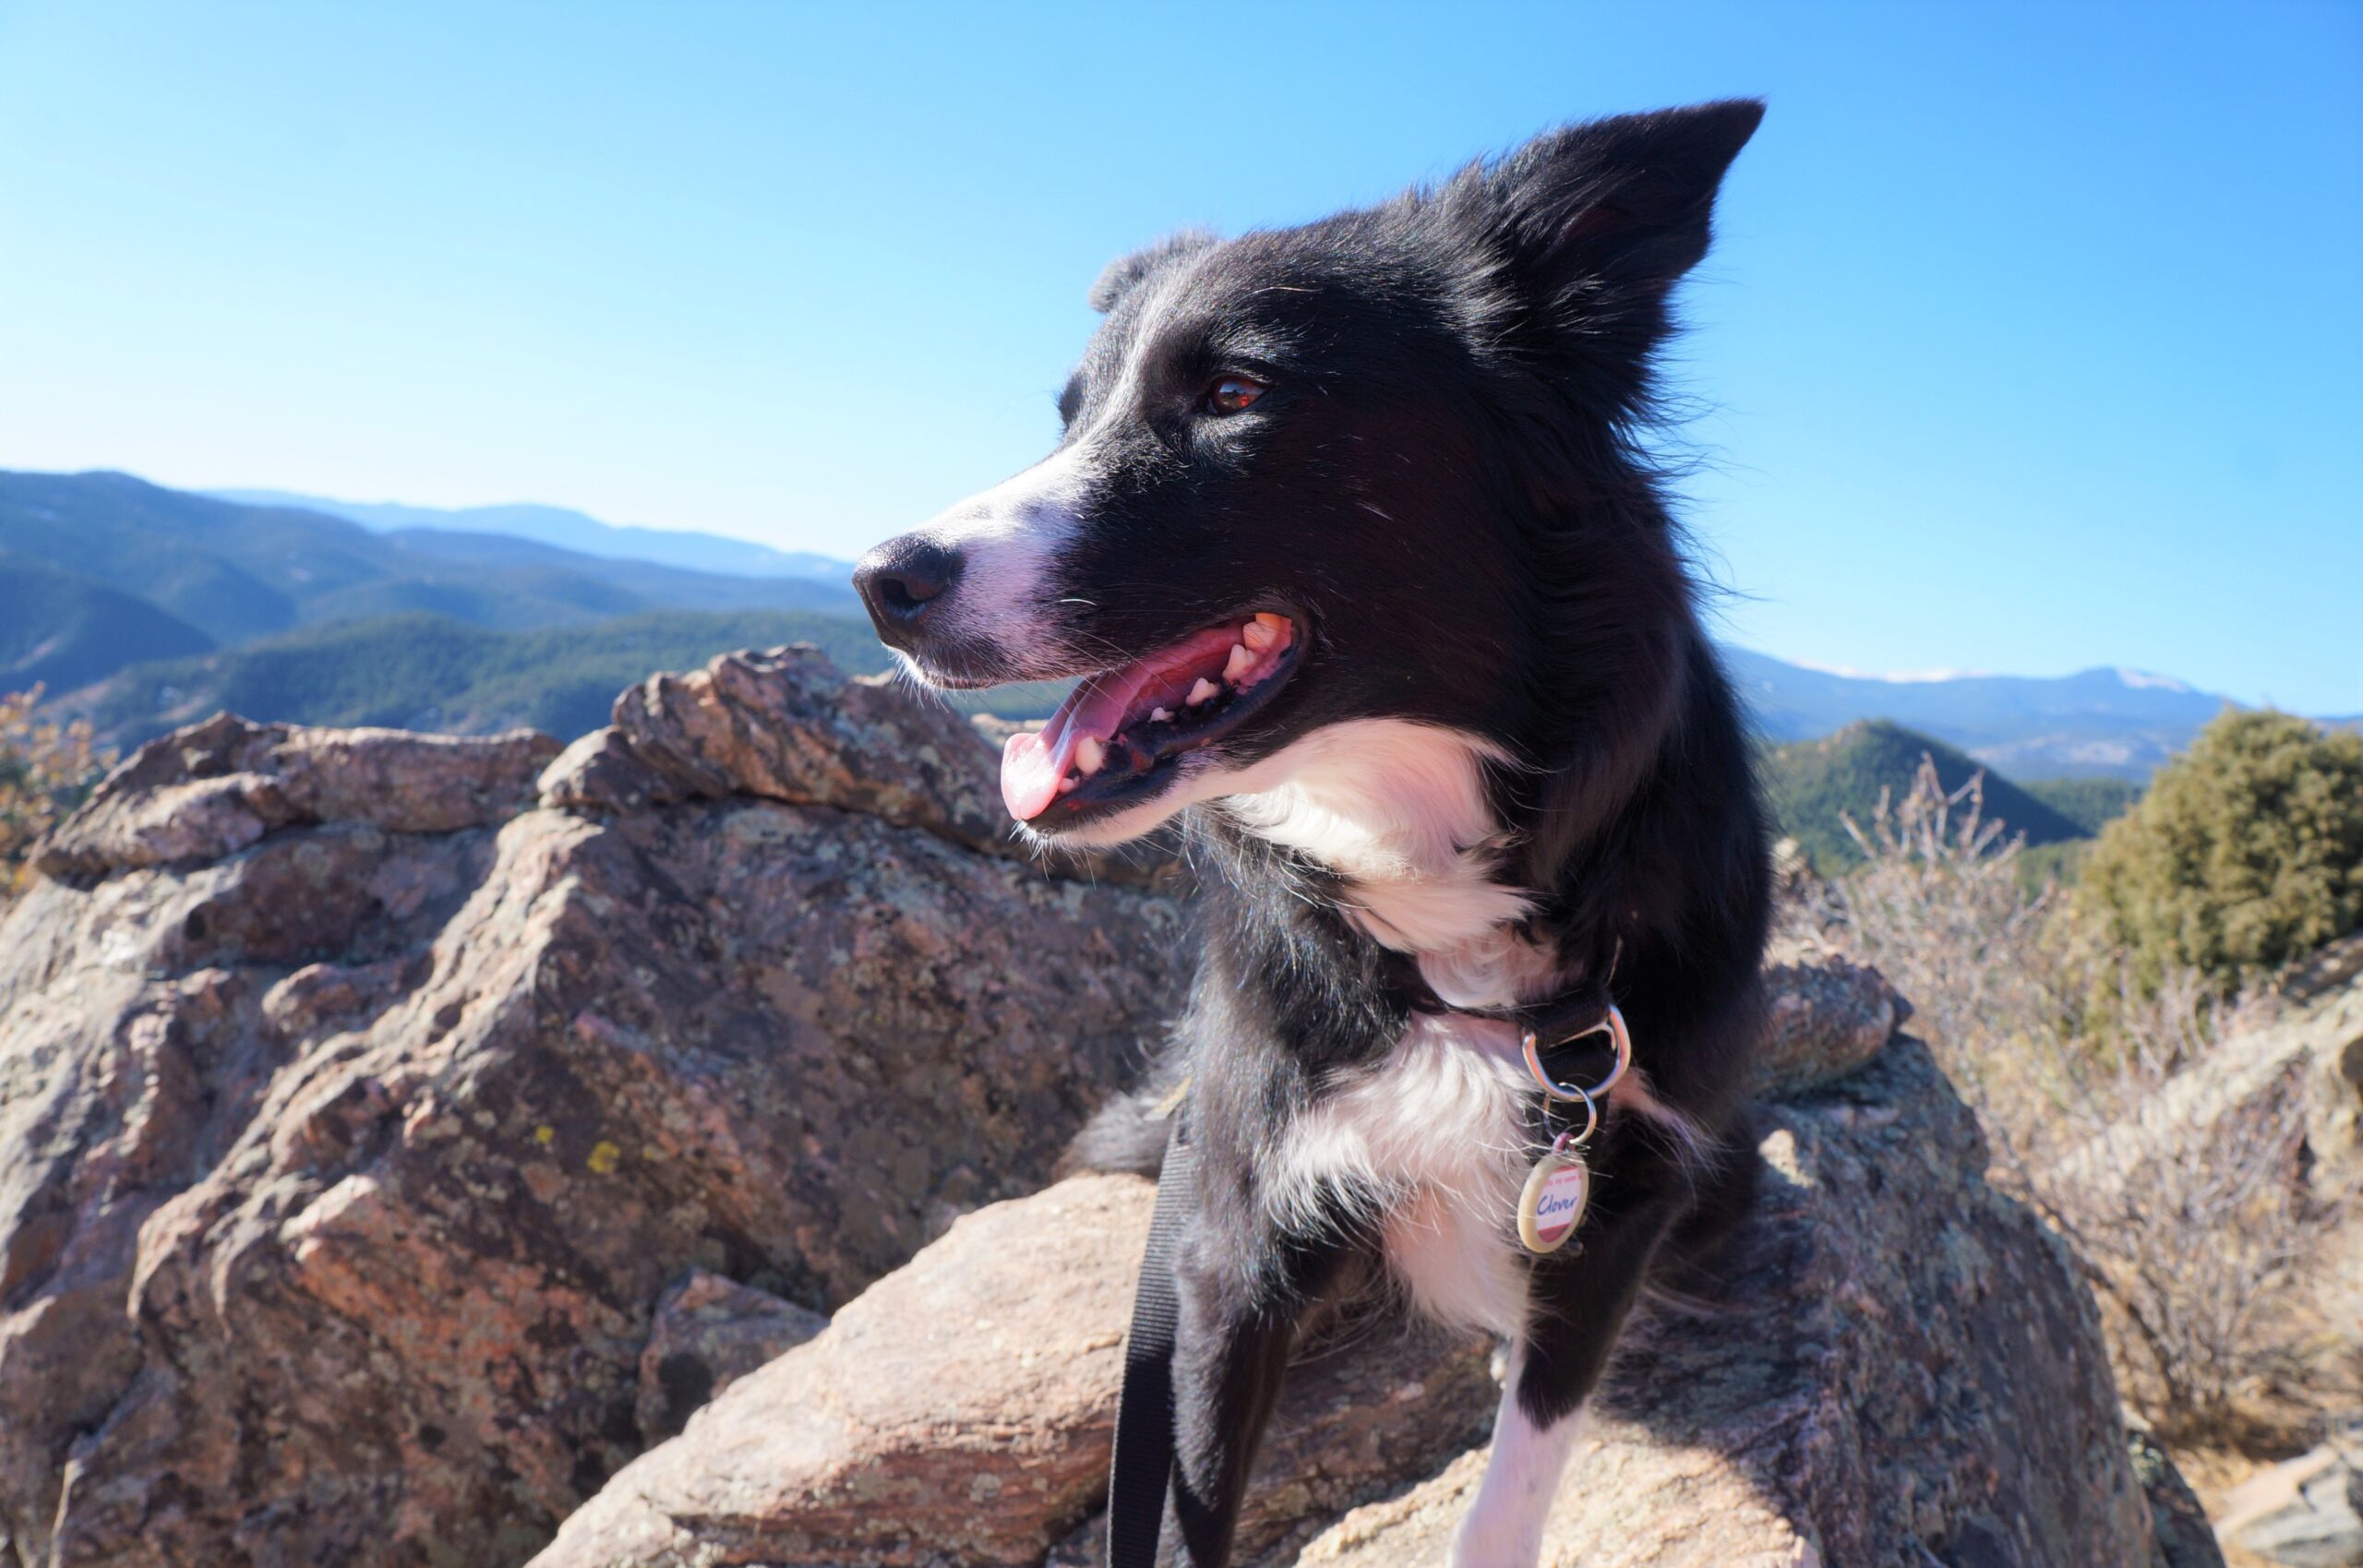 b/w border collie looking to the left on a mountain hike with rocks and blue sky behind her